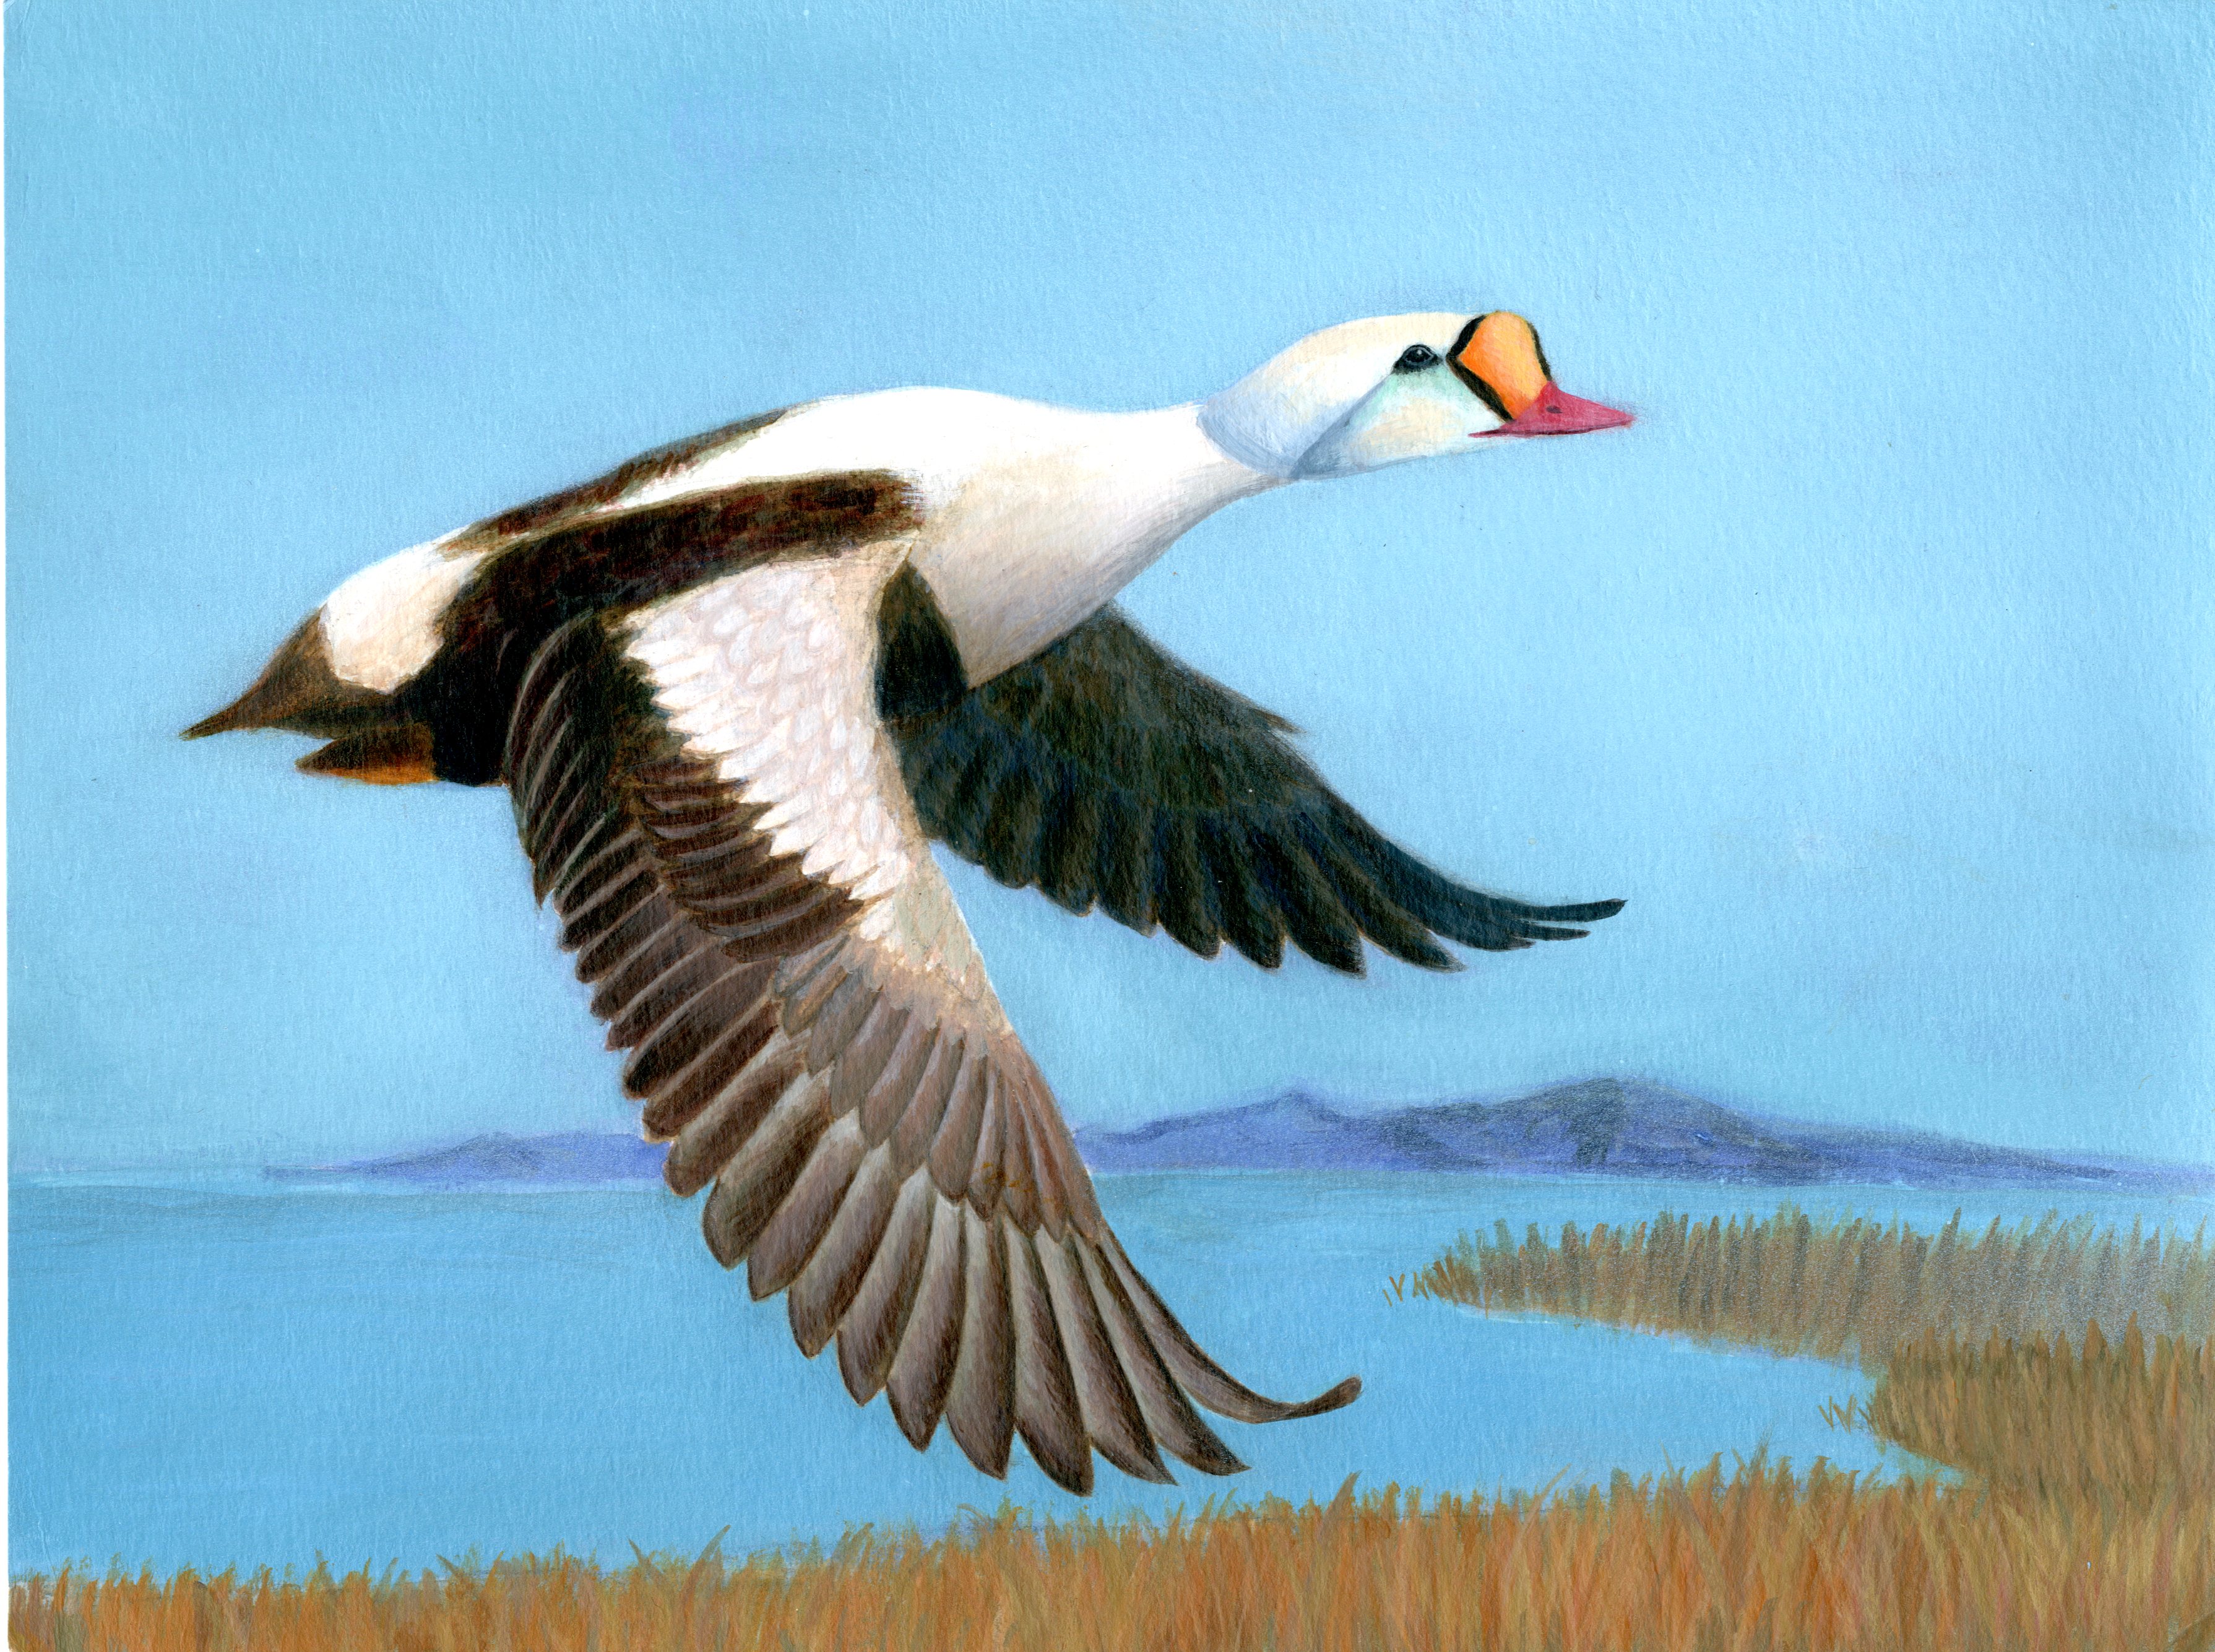 The finalist from Virginia for the 2011 Junior Duck Stamp Art Contest. (5598454448)